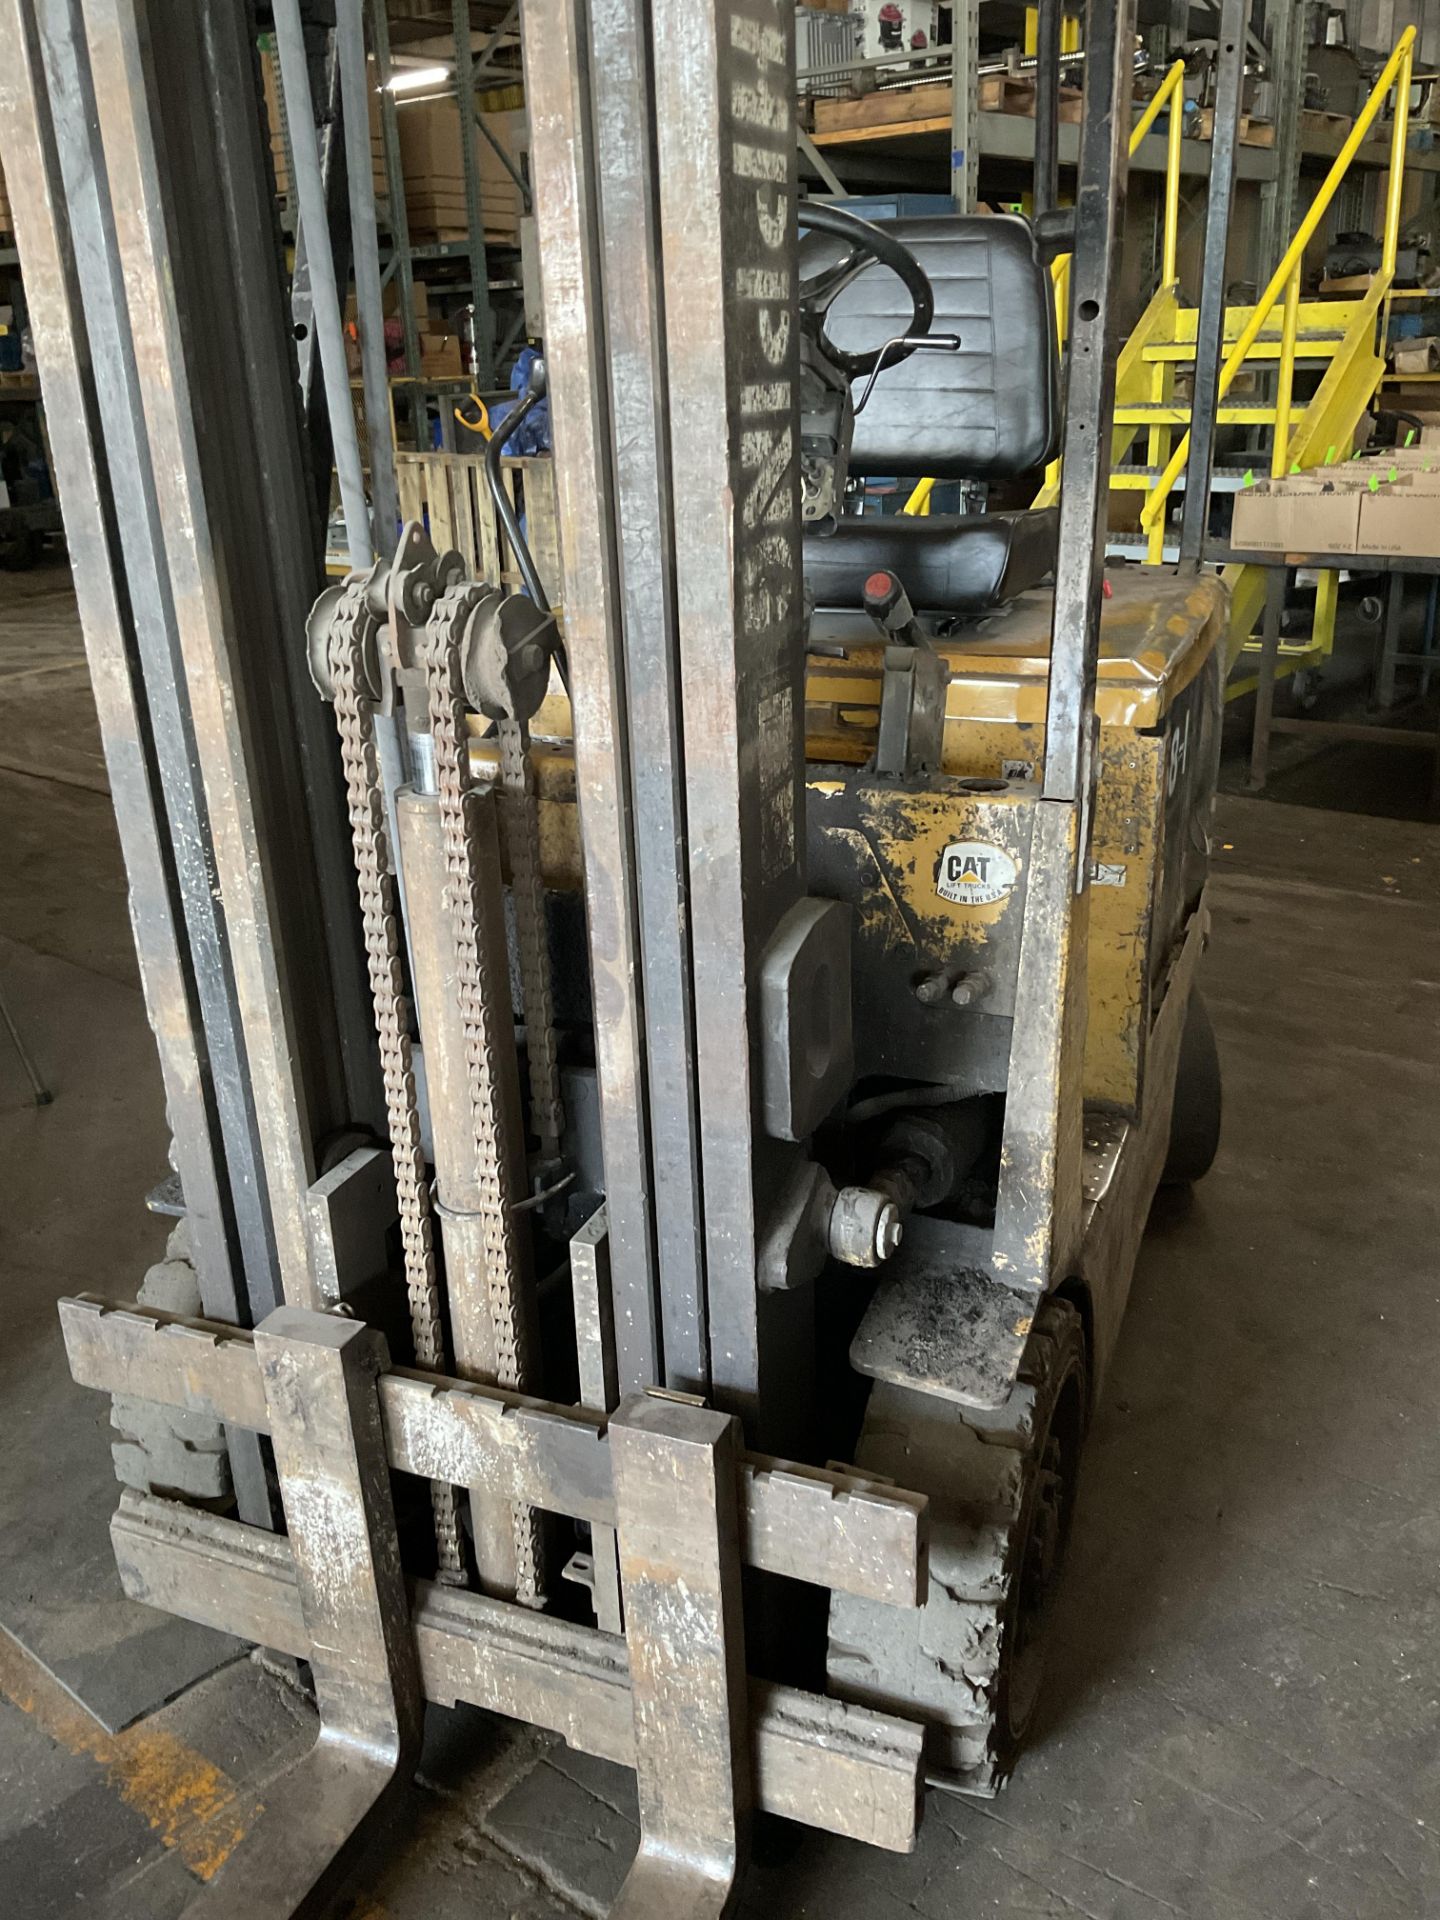 Caterpillar forklift 4500 lbs capacity - Image 11 of 25